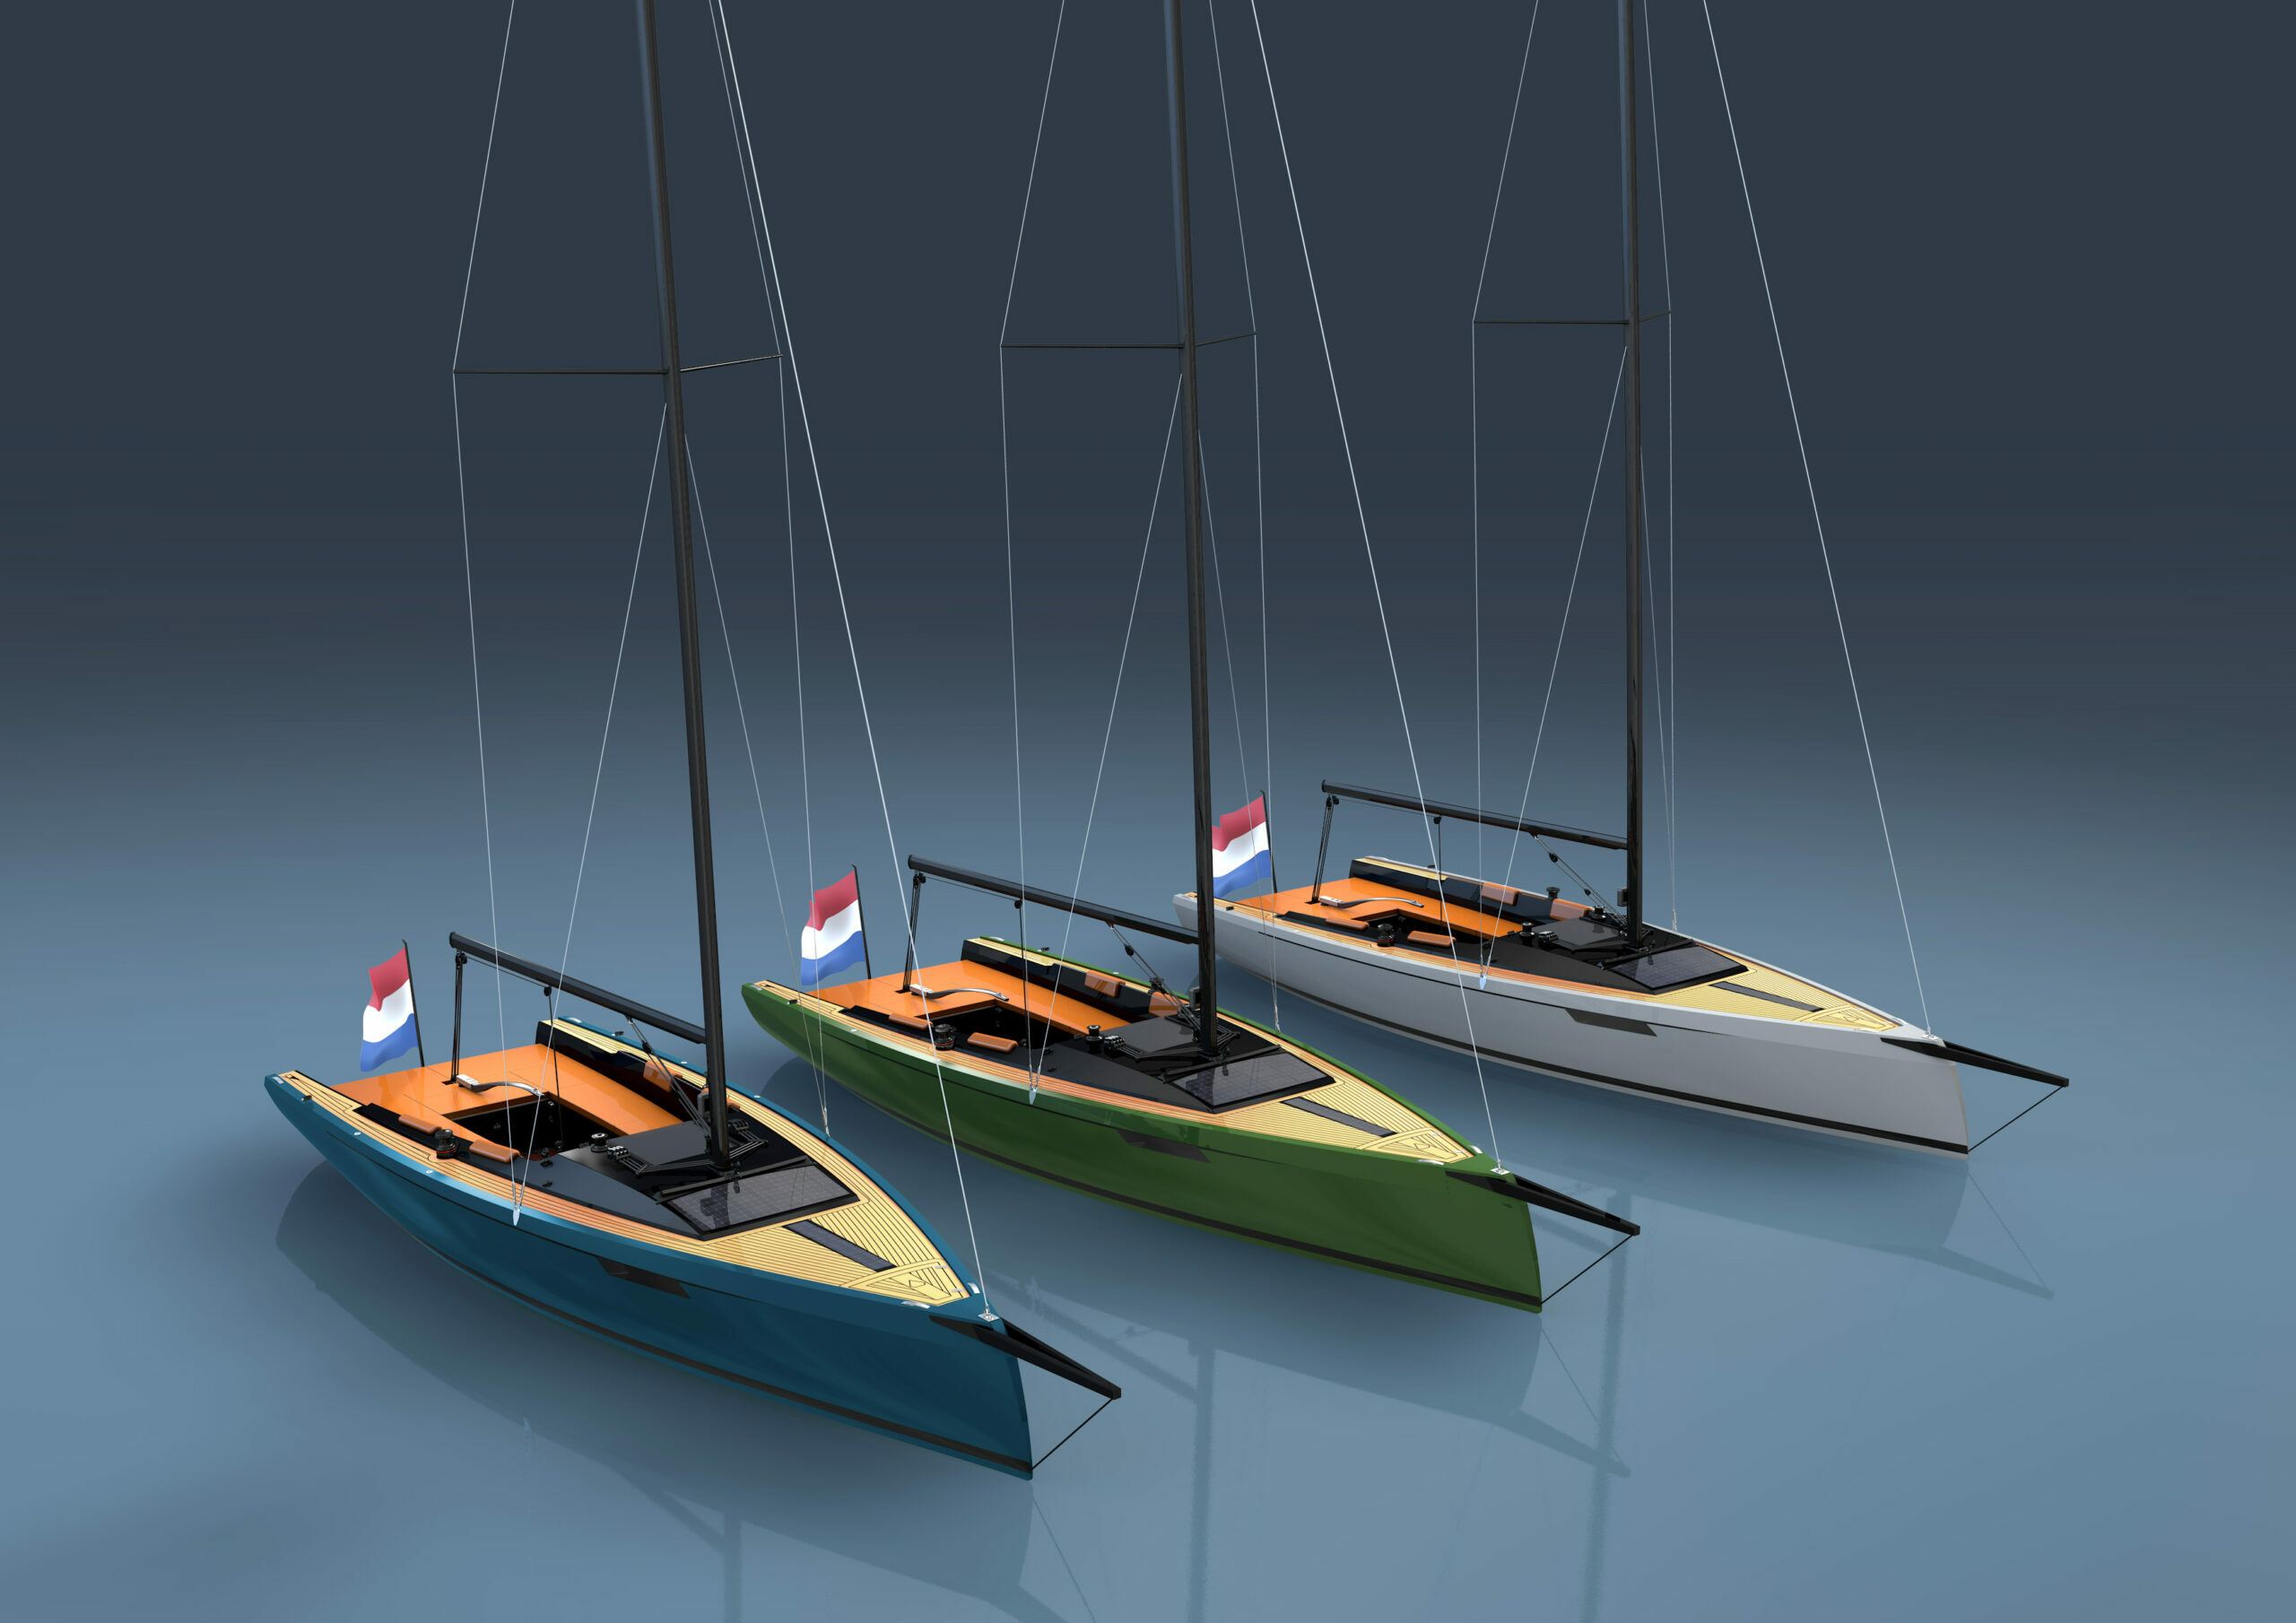 The Saffier SE 24 Lite daysailer, polyester ship. The Saffier SE 24 Lite in blue, green, and white.